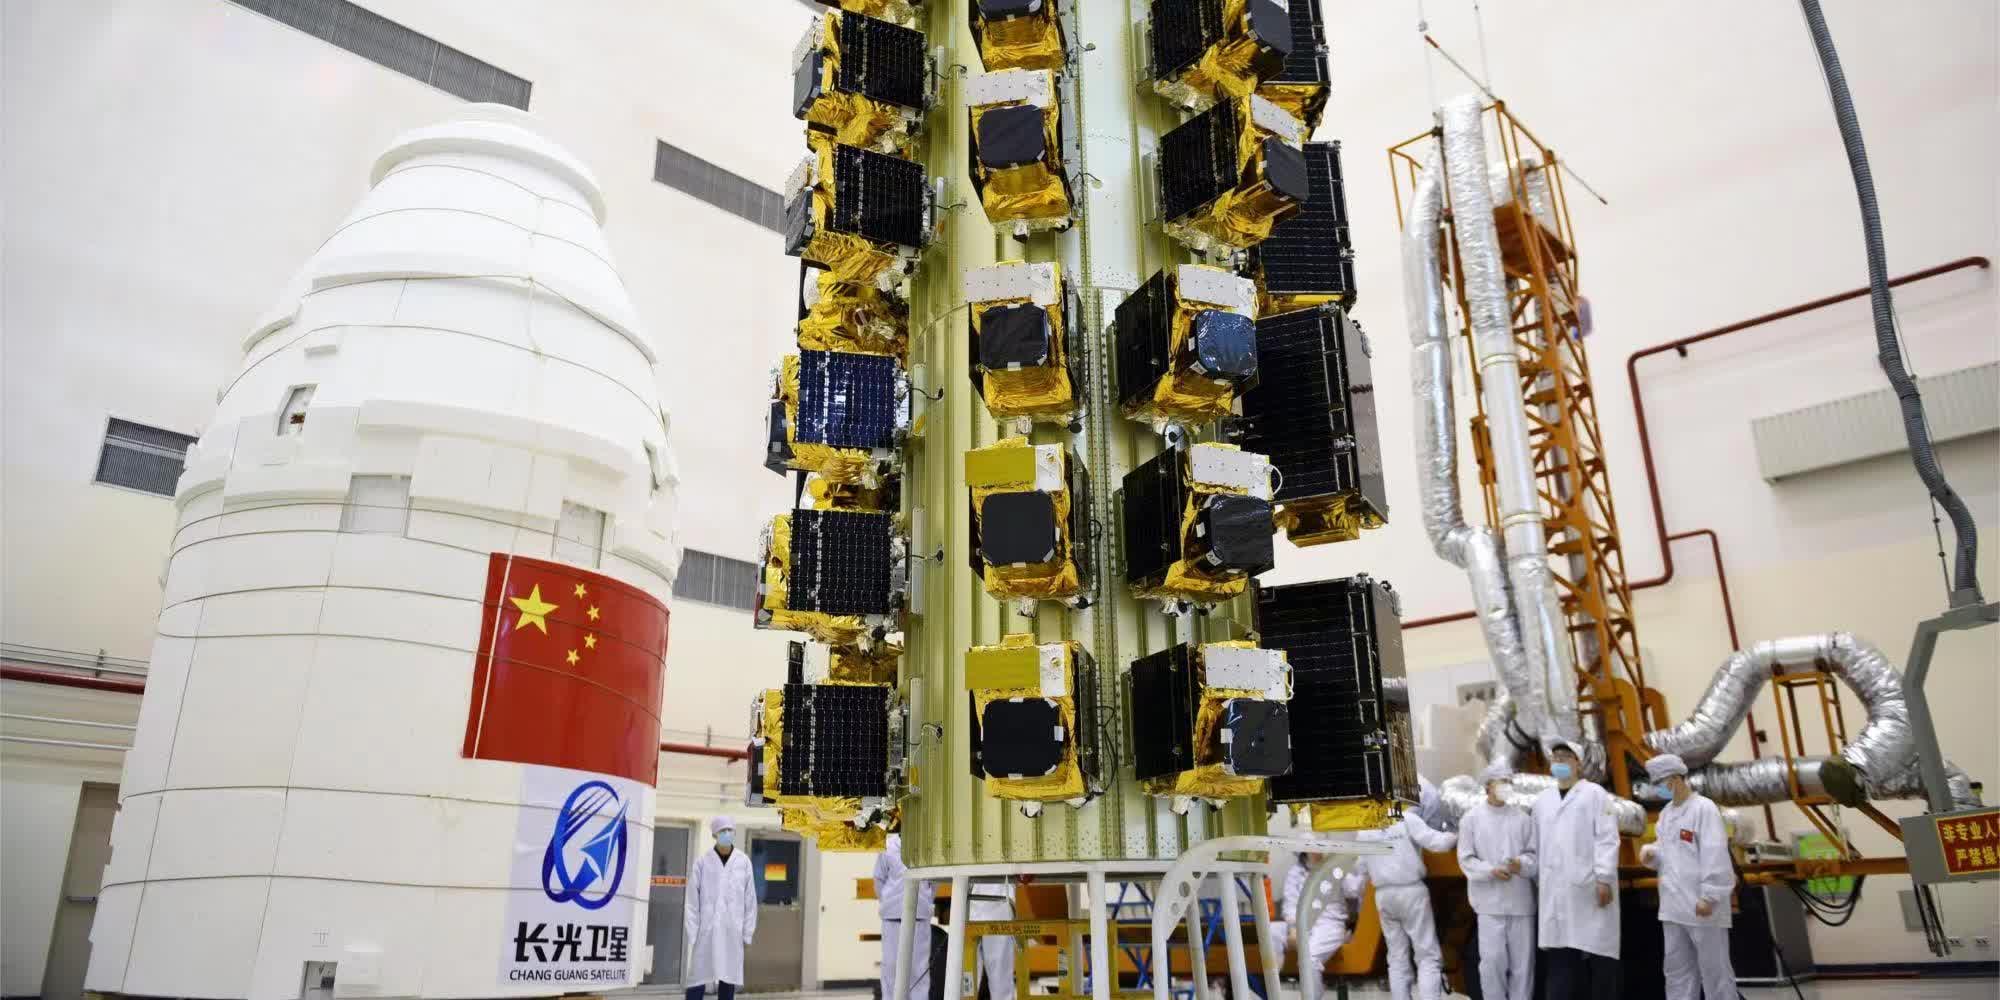 HKUST to launch HK's first higher ed satellite on Friday